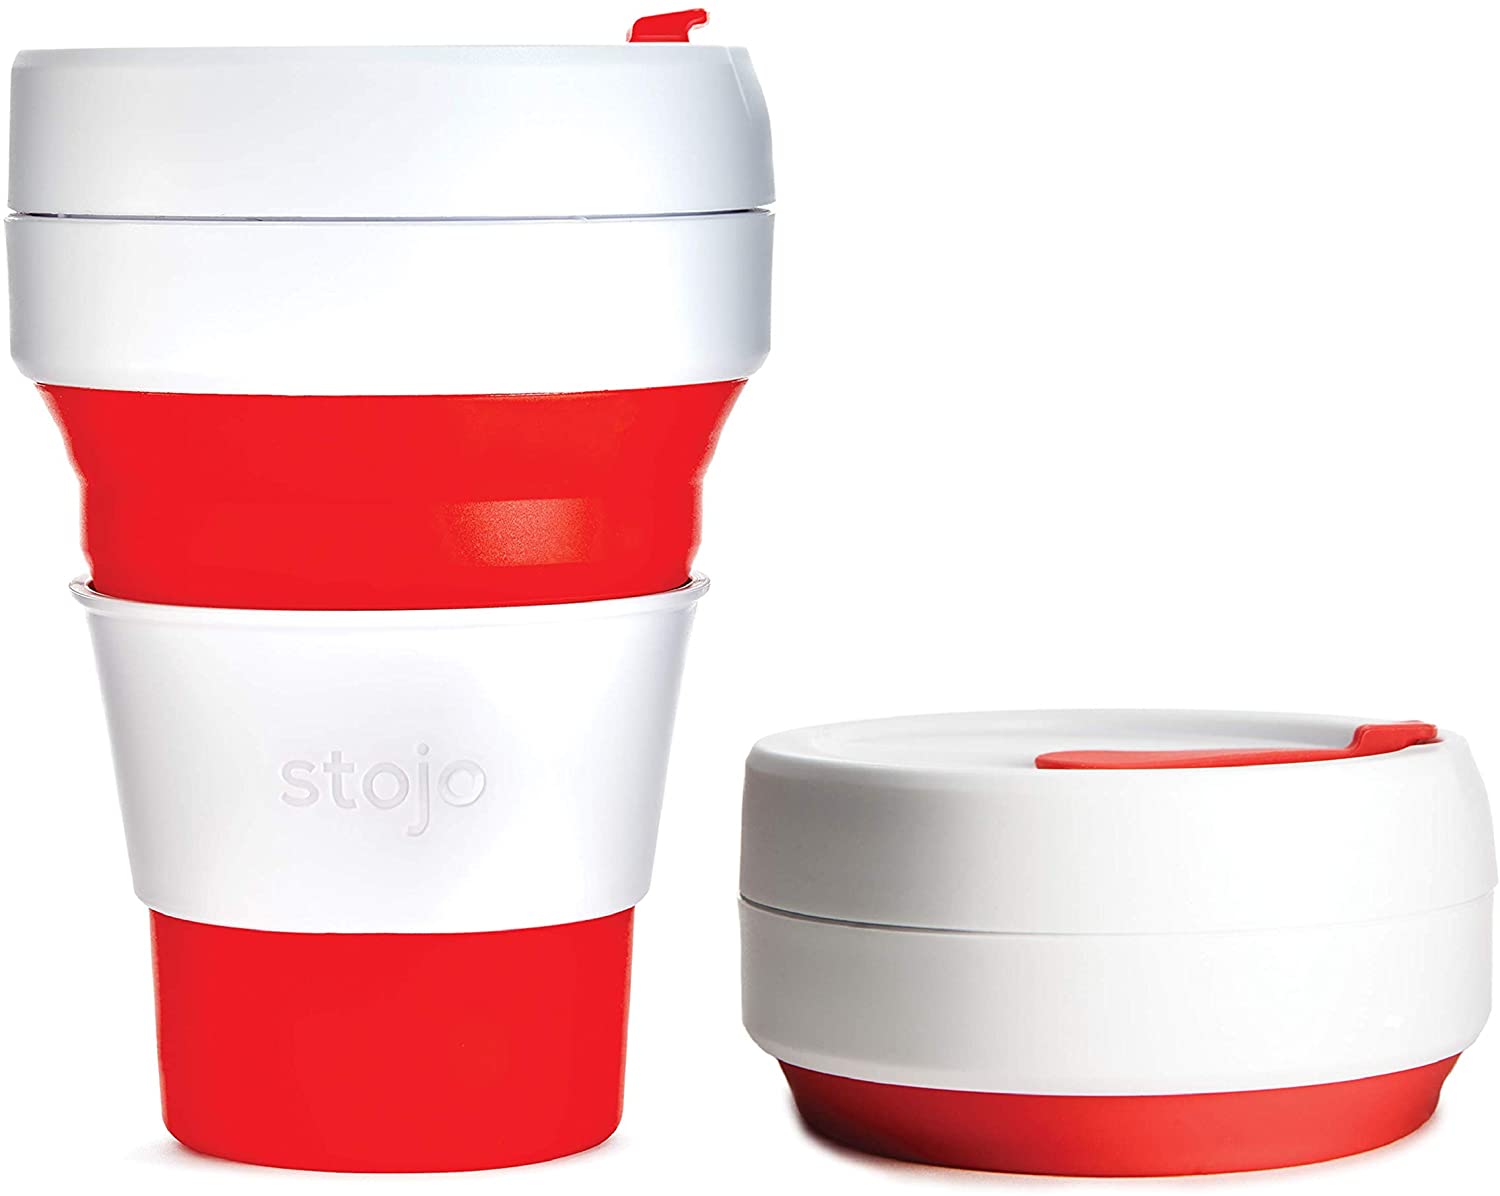 Stojo Silicone On The Go Collapsible Cup